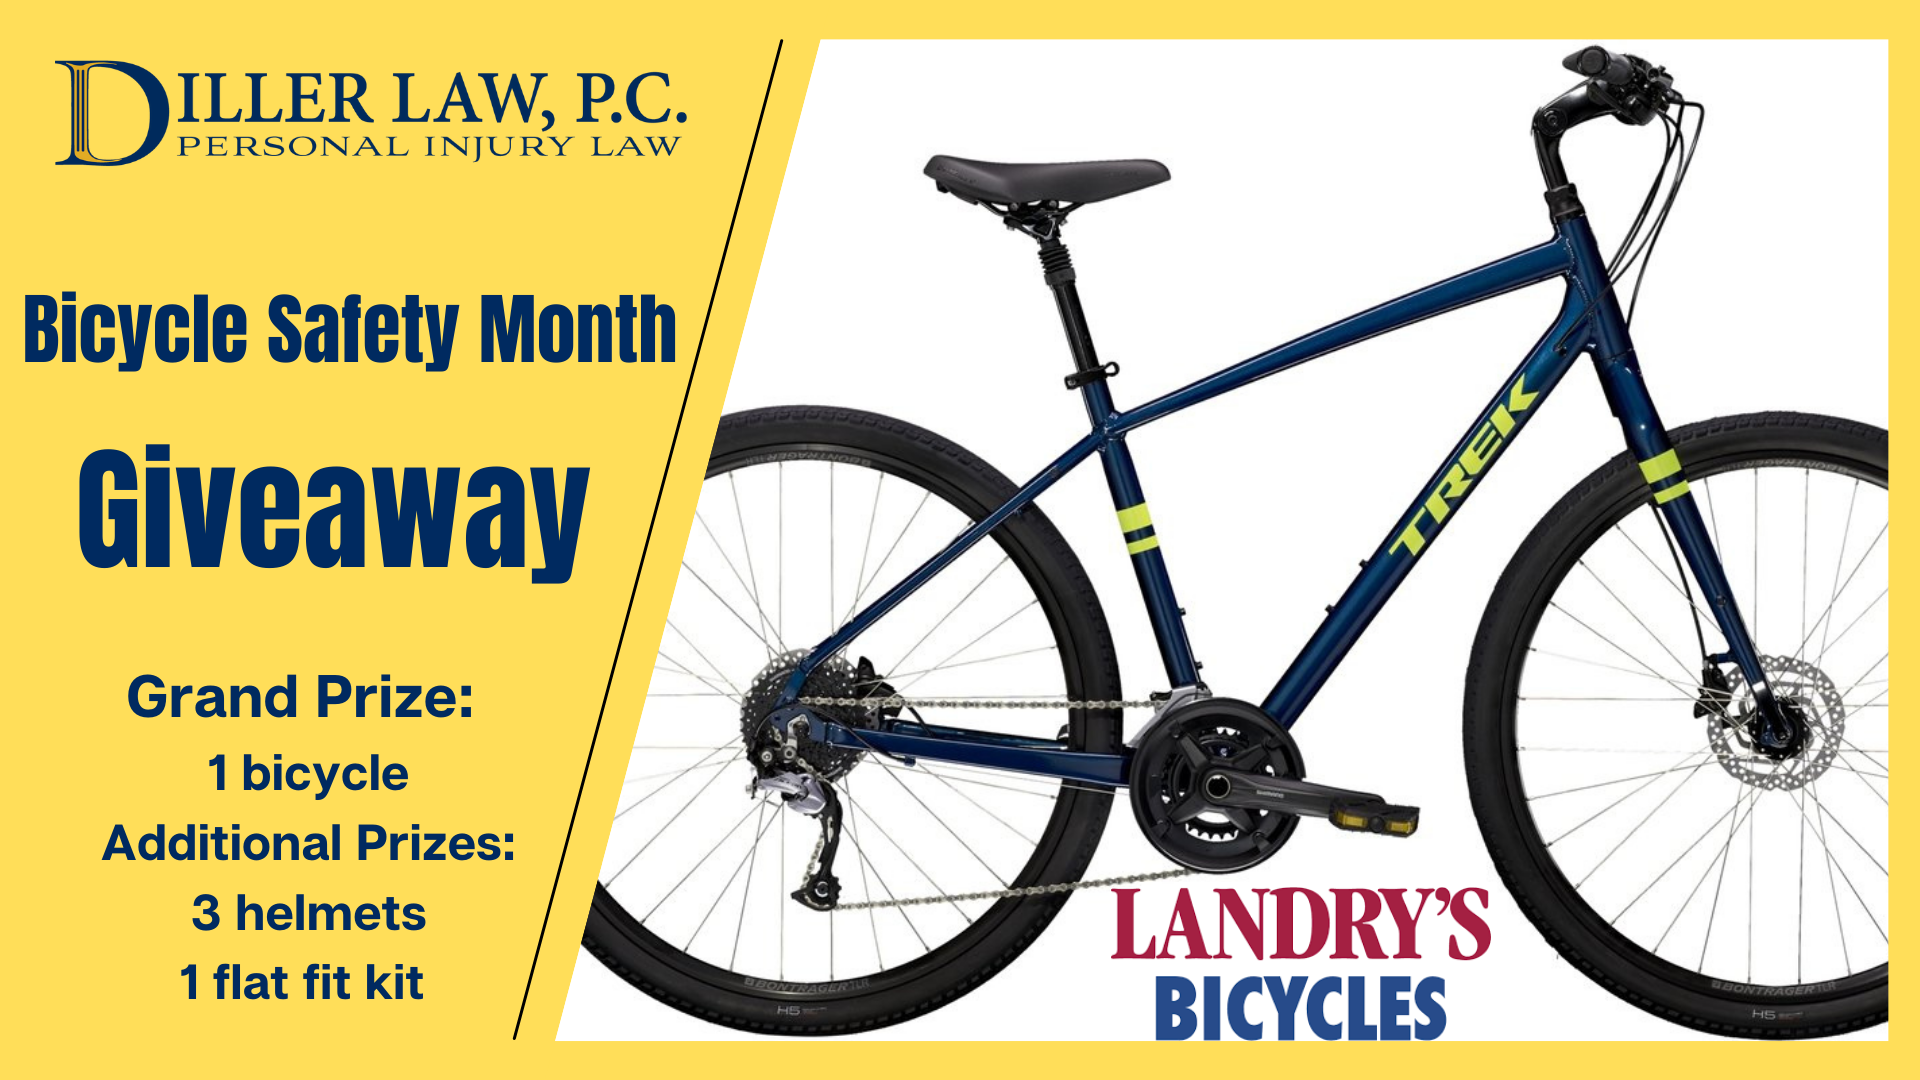 Bicycle Safety Month Bicycle Giveaway - May 2021